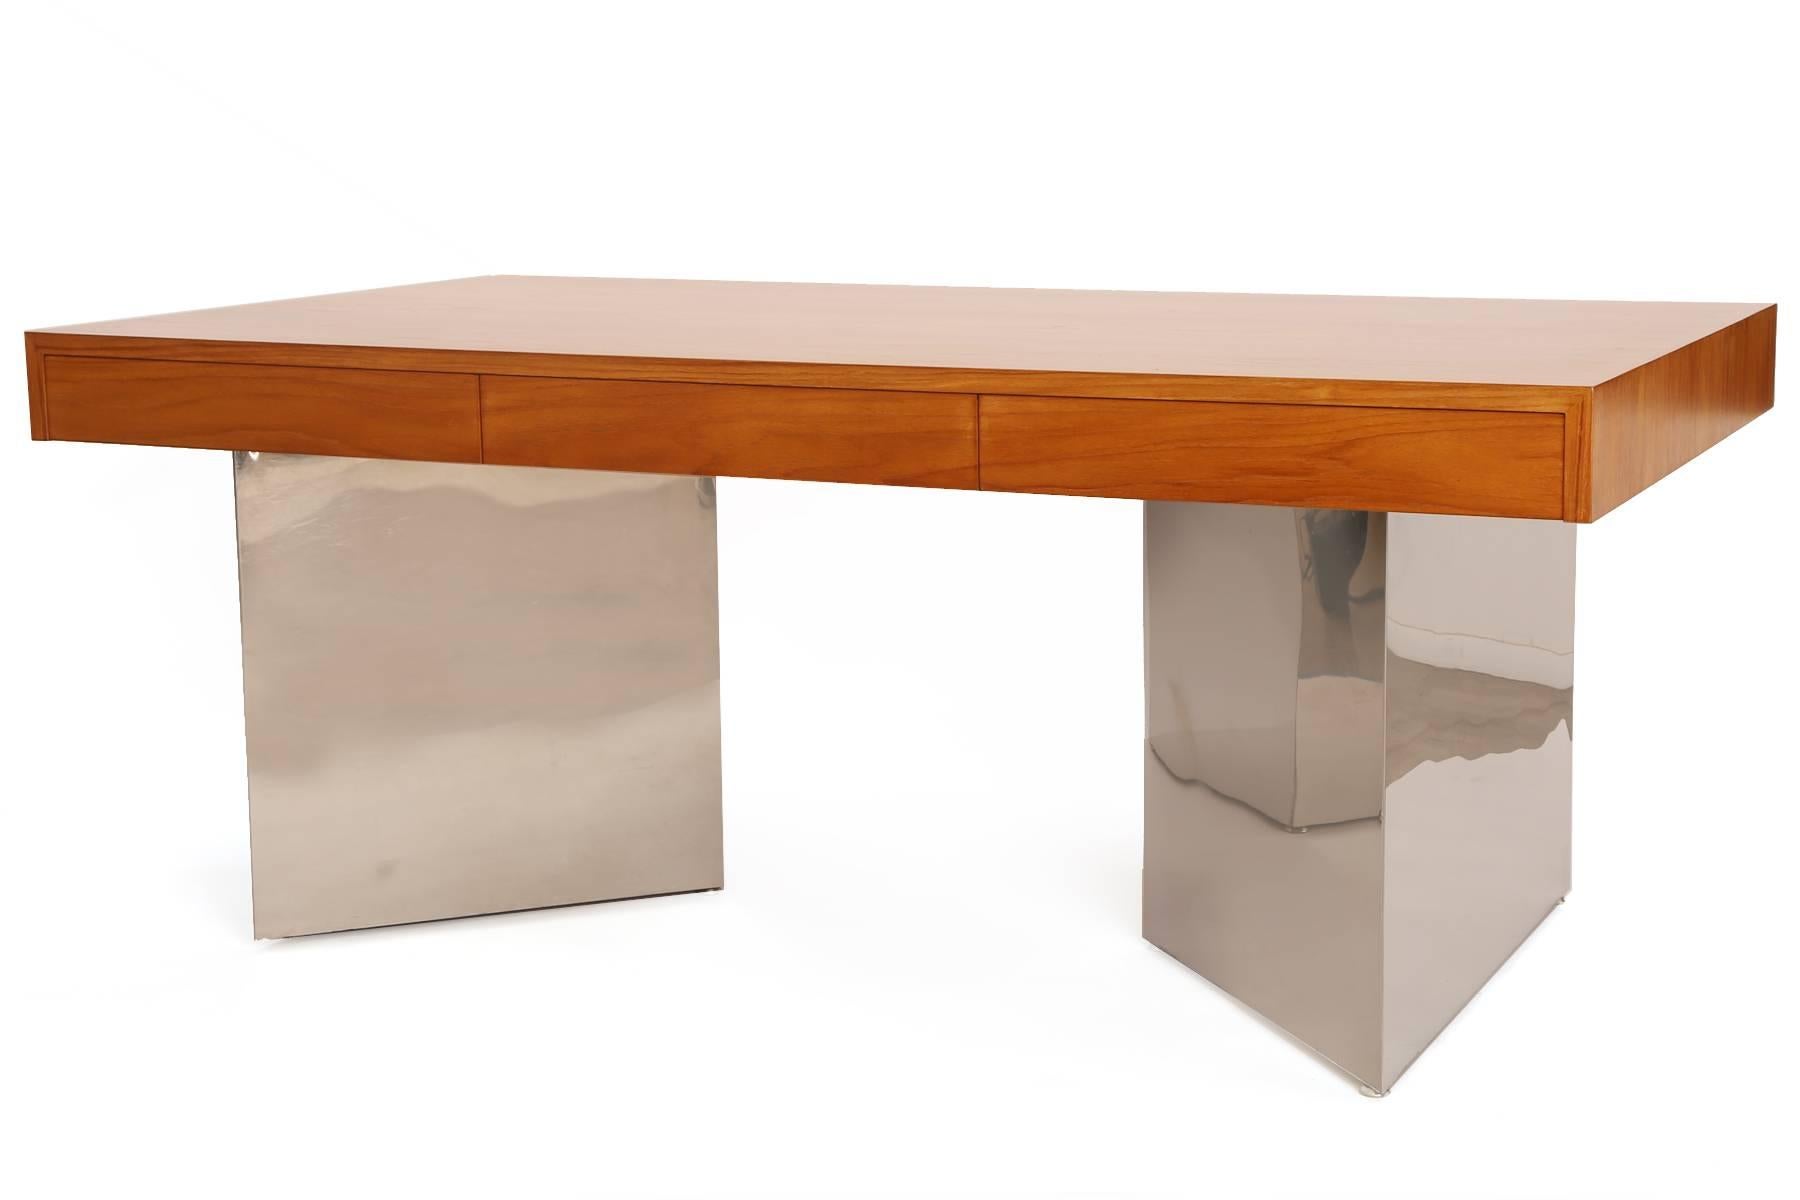 Teak and polished steel desk by Pace, circa early 1970s. This example has an exquisitely grained teak top with three inset drawers. Drawers have teak dividers within. The bases are triangular mirror polished steel over wood. The top of the desk has